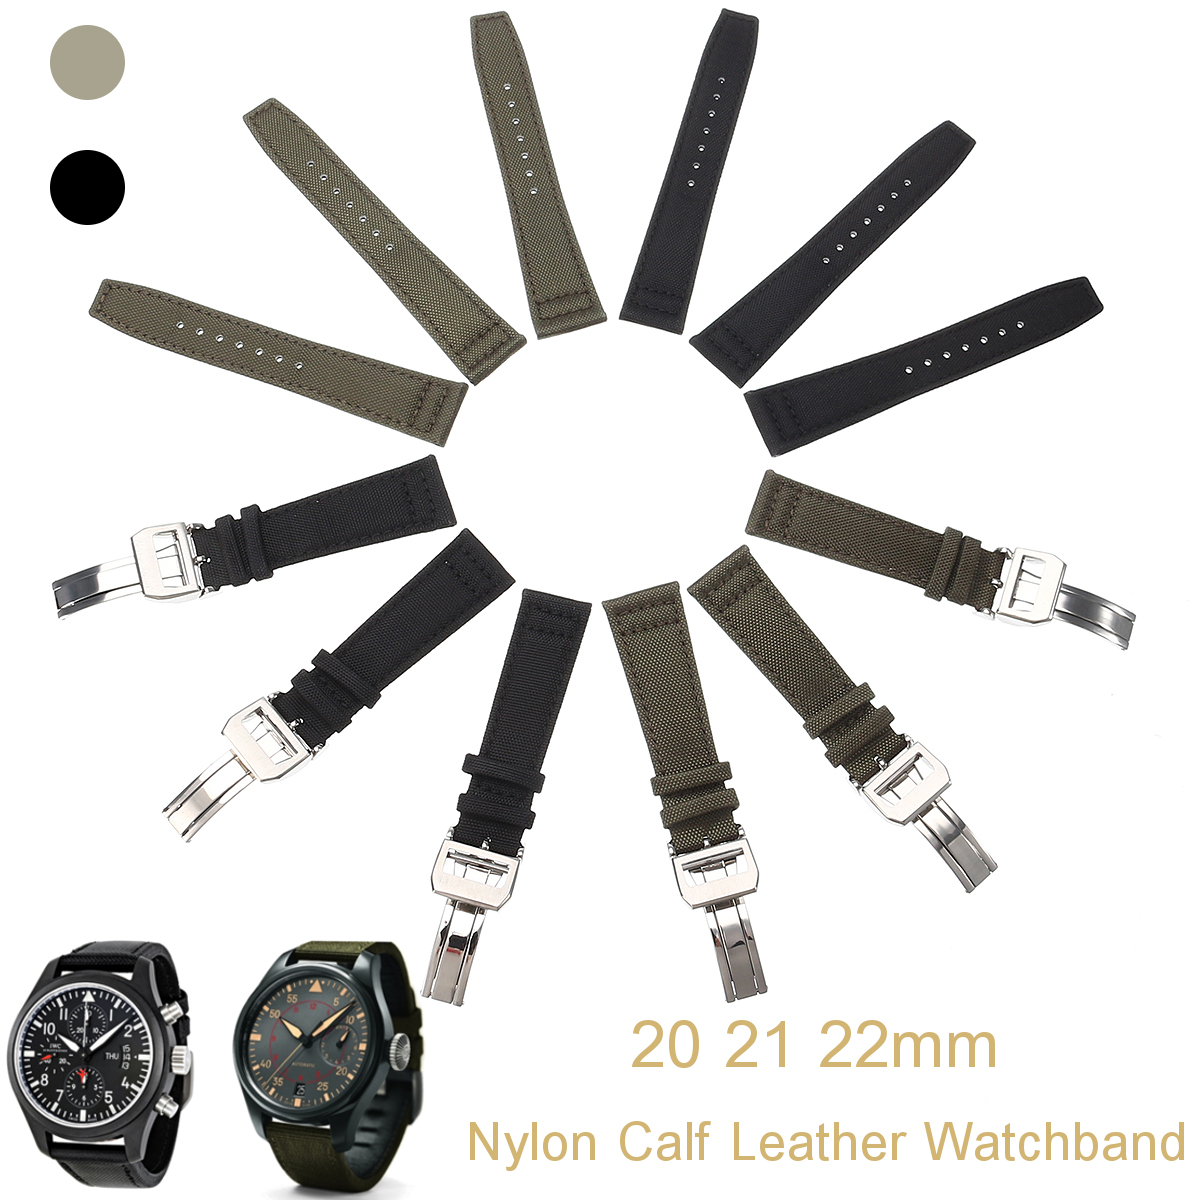 20mm-21mm-22mm-Nylon-Calf-Leather-Wristband-Watch-Band-Smart-Watch-Strap-Replacement-1644158-10